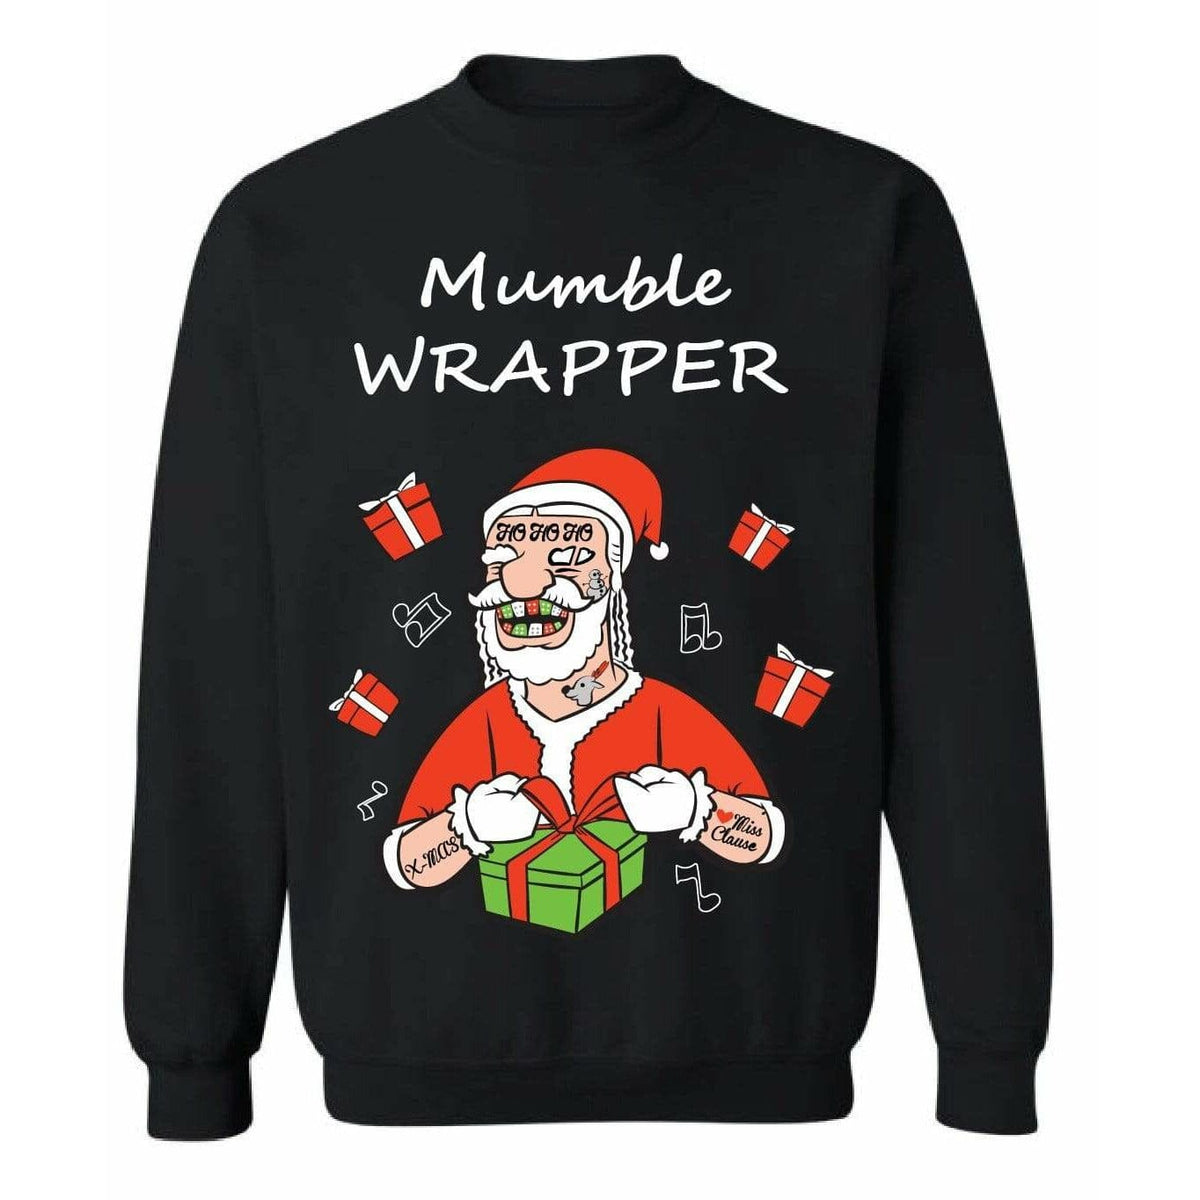 MUMBLE WRAPPER - Black "Ugly" Christmas Sweaters Snowtorious Small Adult 